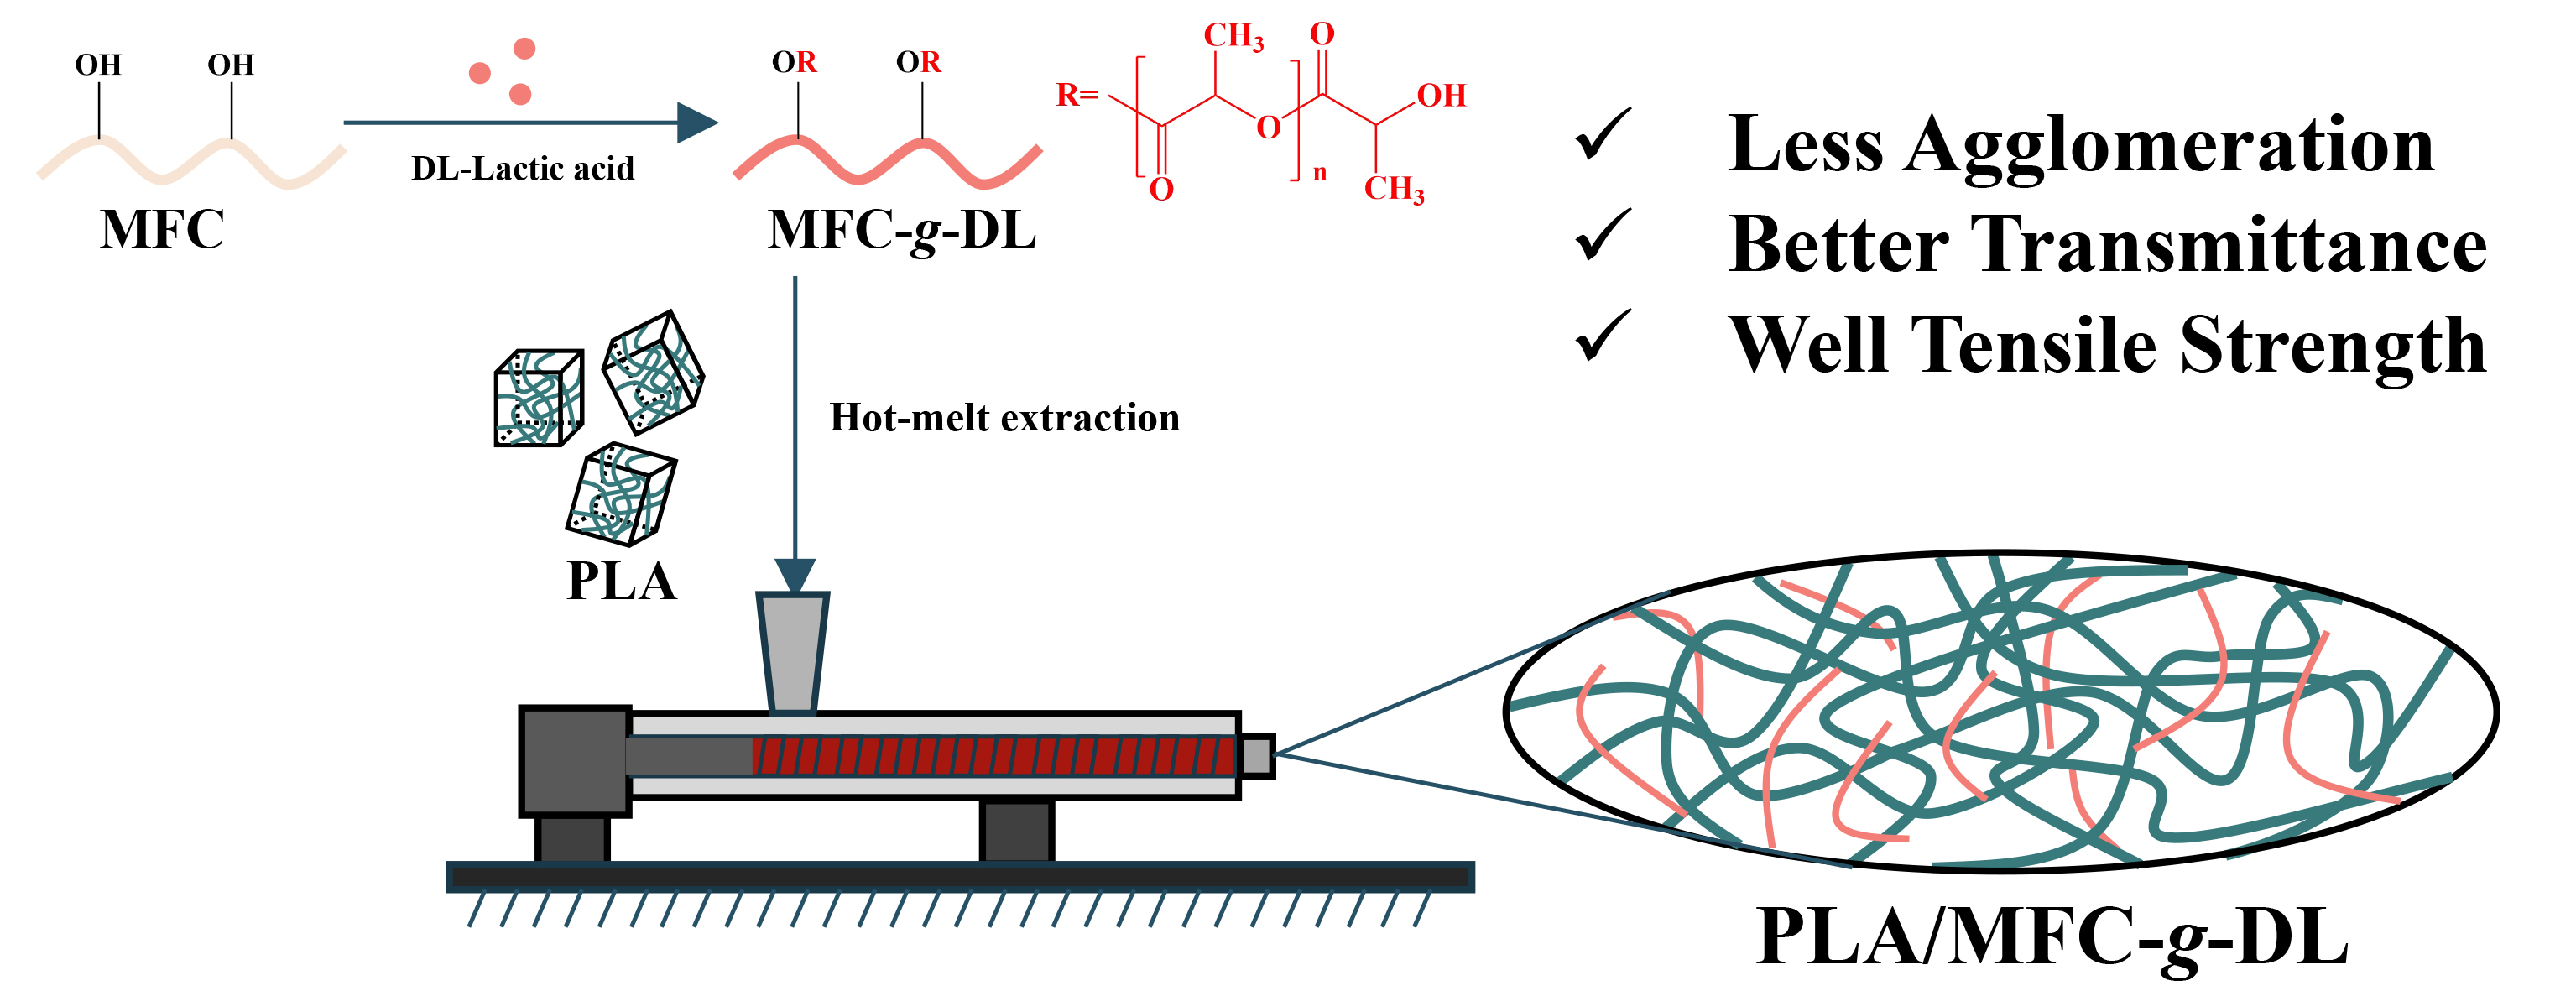 Biocomposites of Polylactic Acid Reinforced by DL-Lactic Acid-Grafted Microfibrillated Cellulose